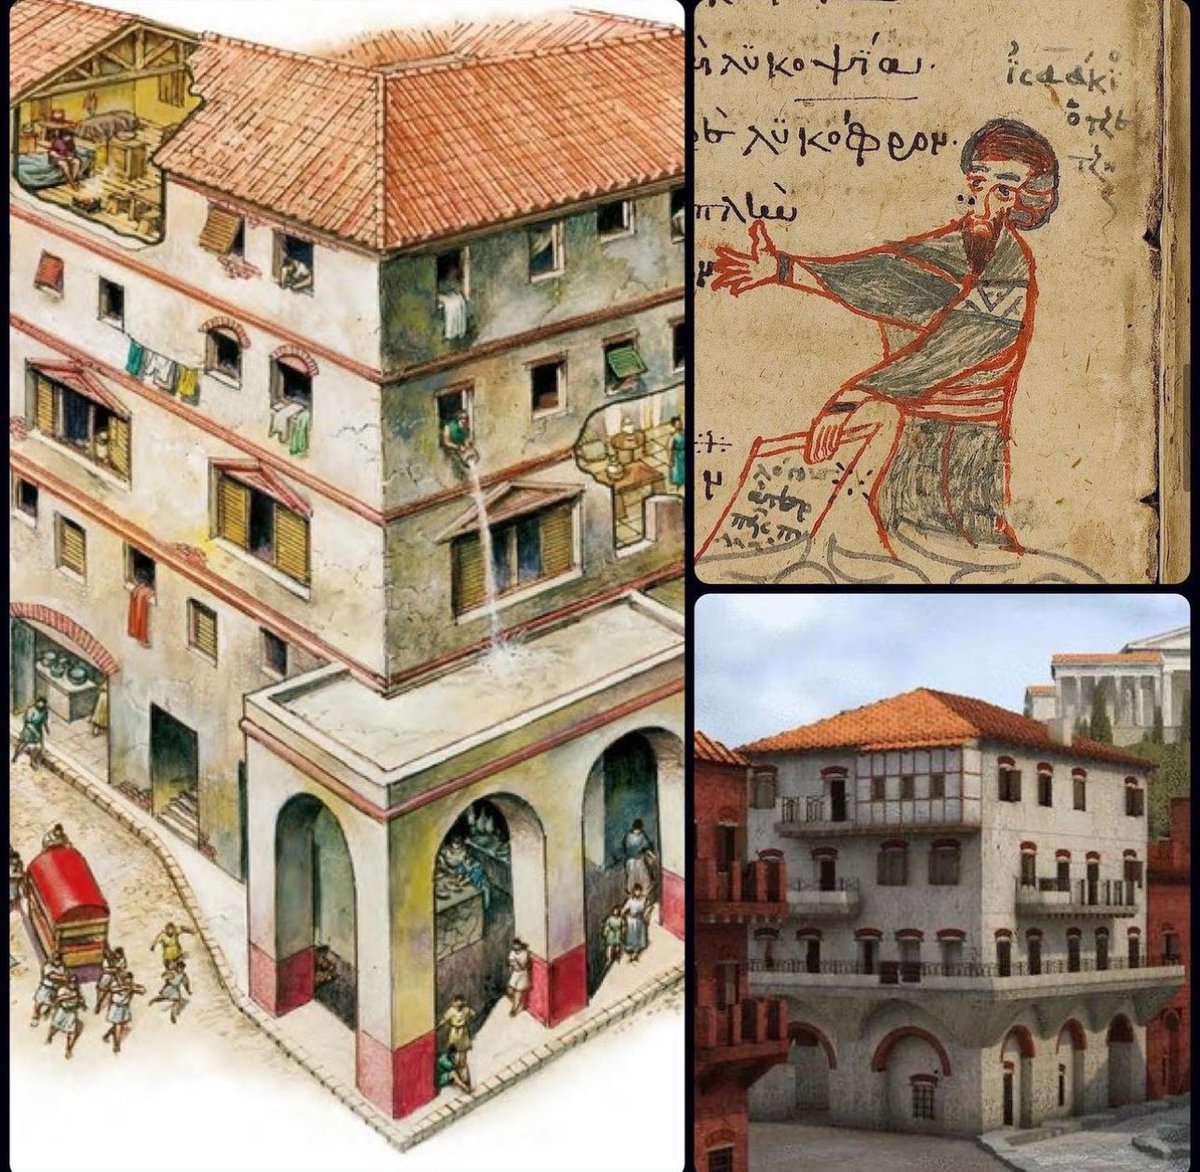 Pre-modern life was not the most sanitary... The 12th century scholar Ioannes Tzetzes, who lived in Constantinople, recorded a problem he had with his upstairs neighbors. Namely, he complained about the “river of urine.” Having problematic upstairs neighbors sounds modern,